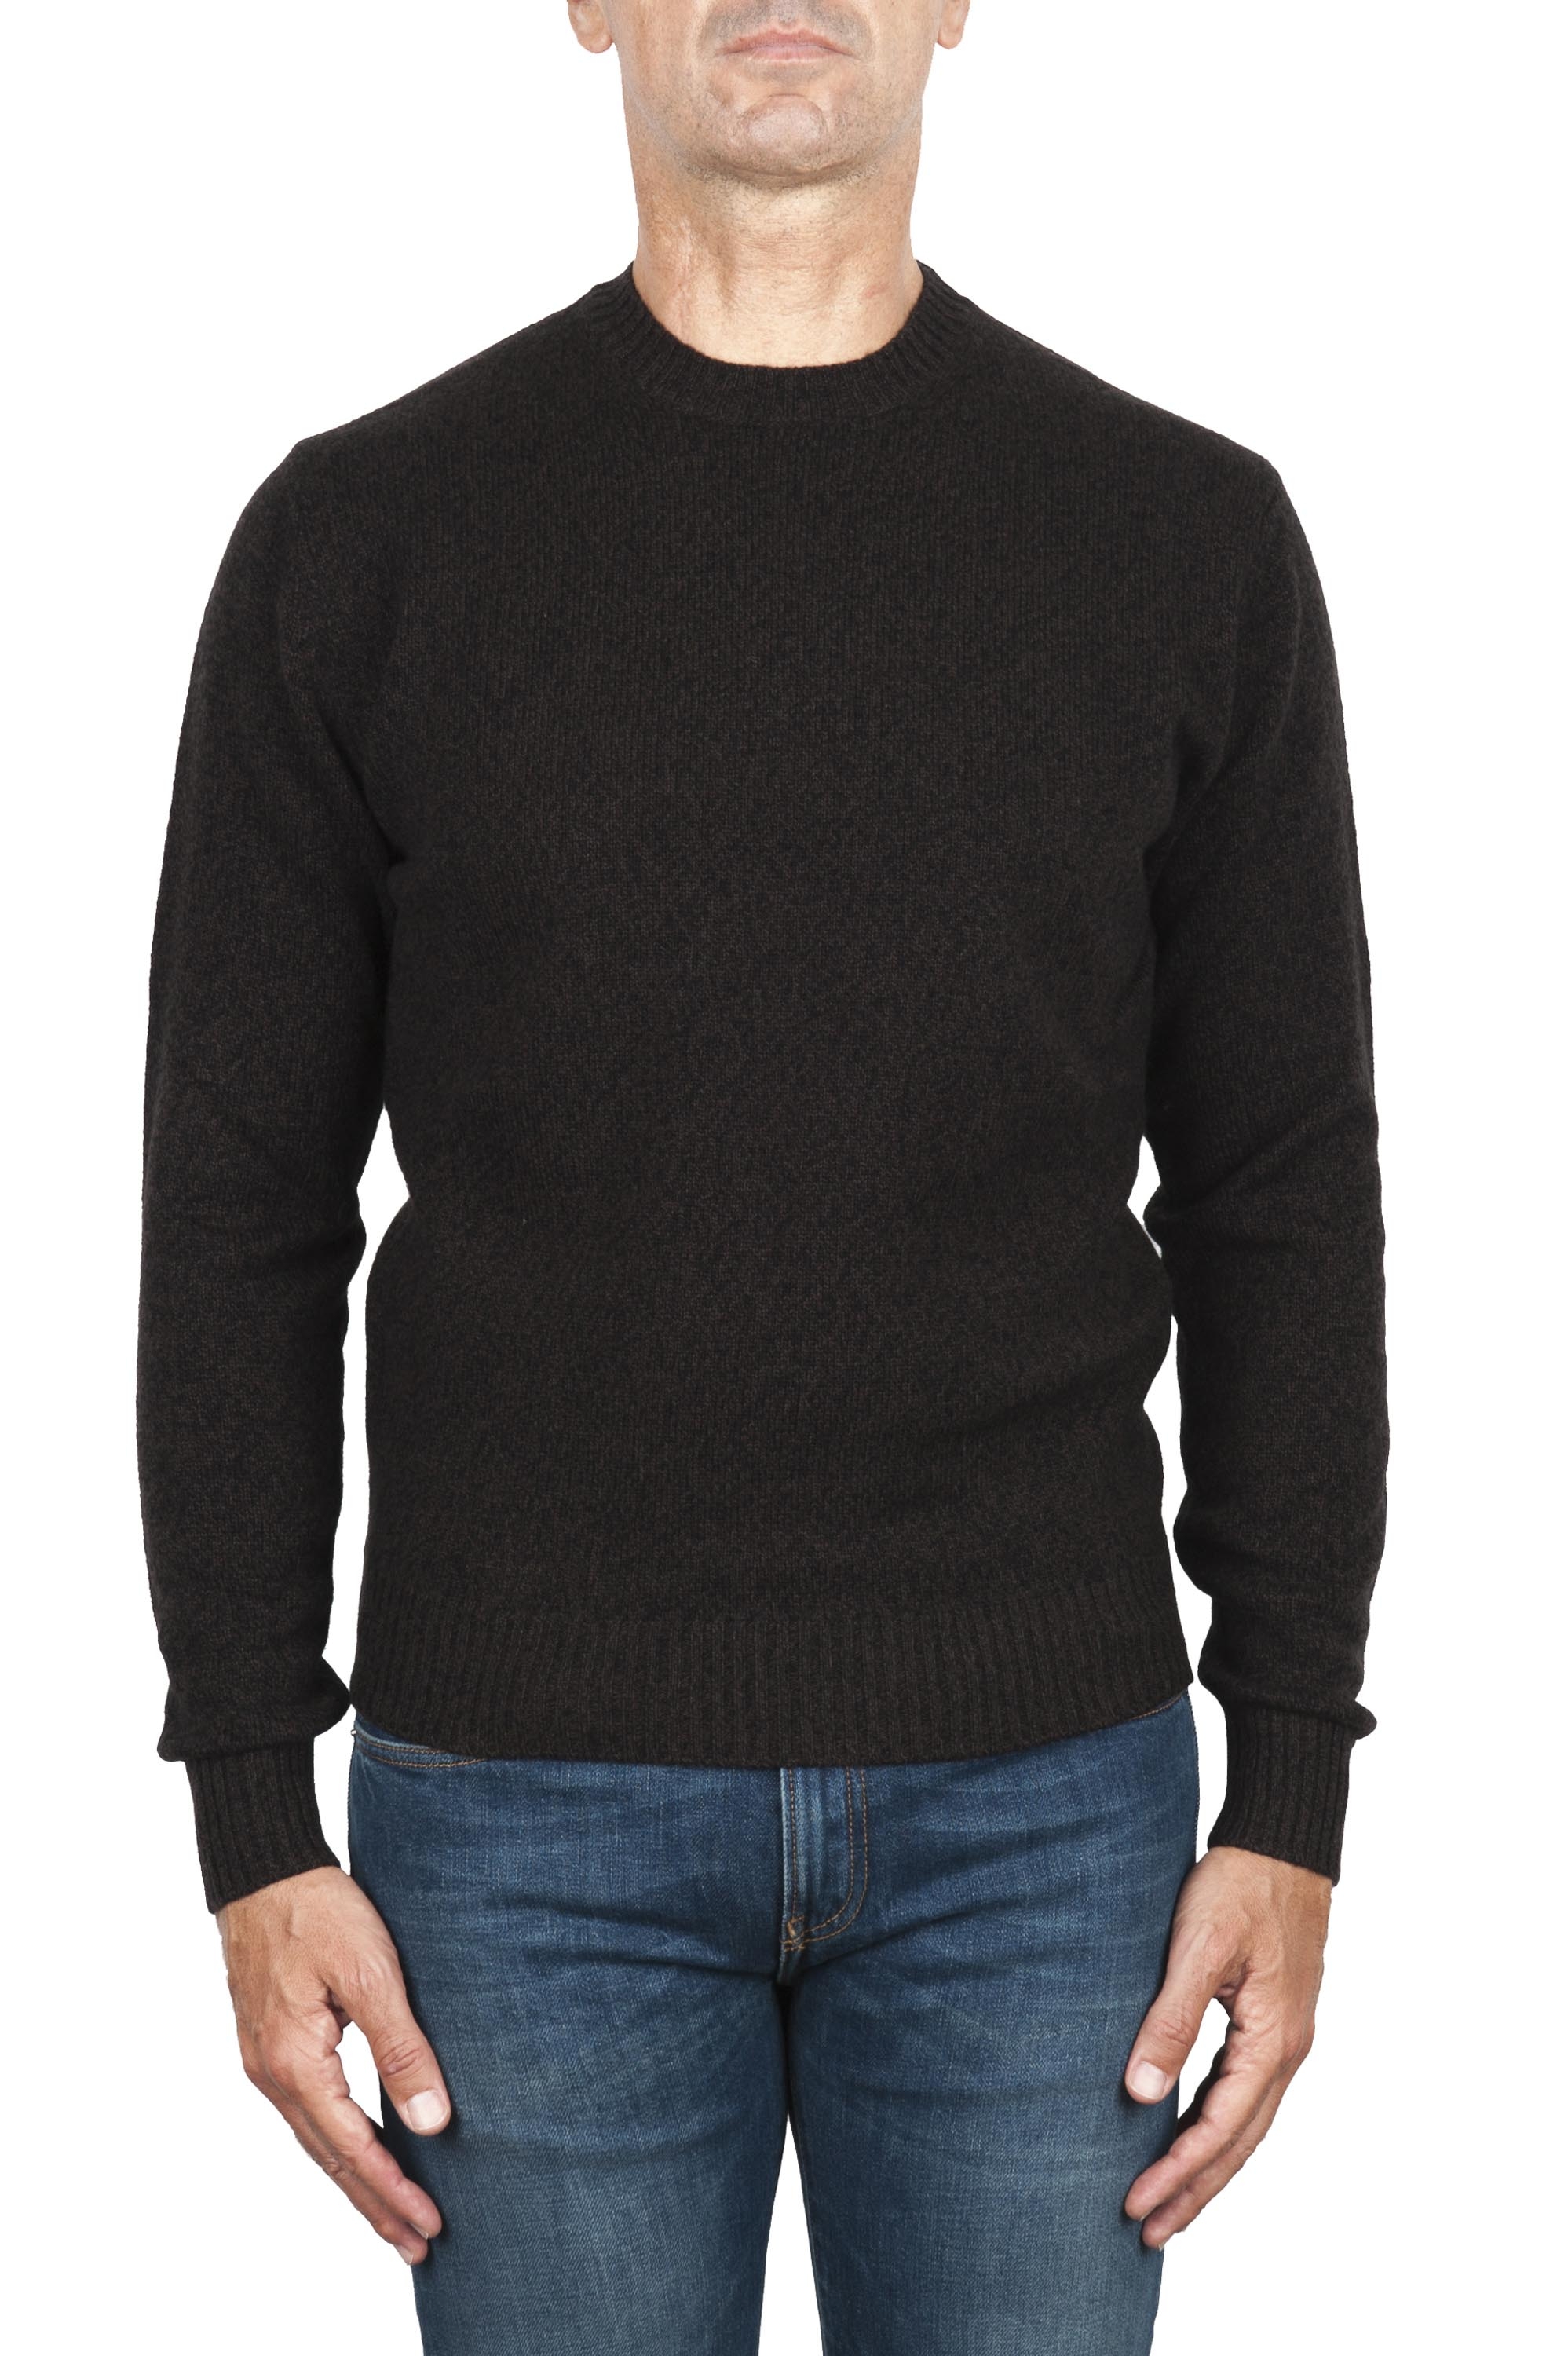 SBU 02996_2020AW Melange brown wool and cashmere blend crew neck sweater 01